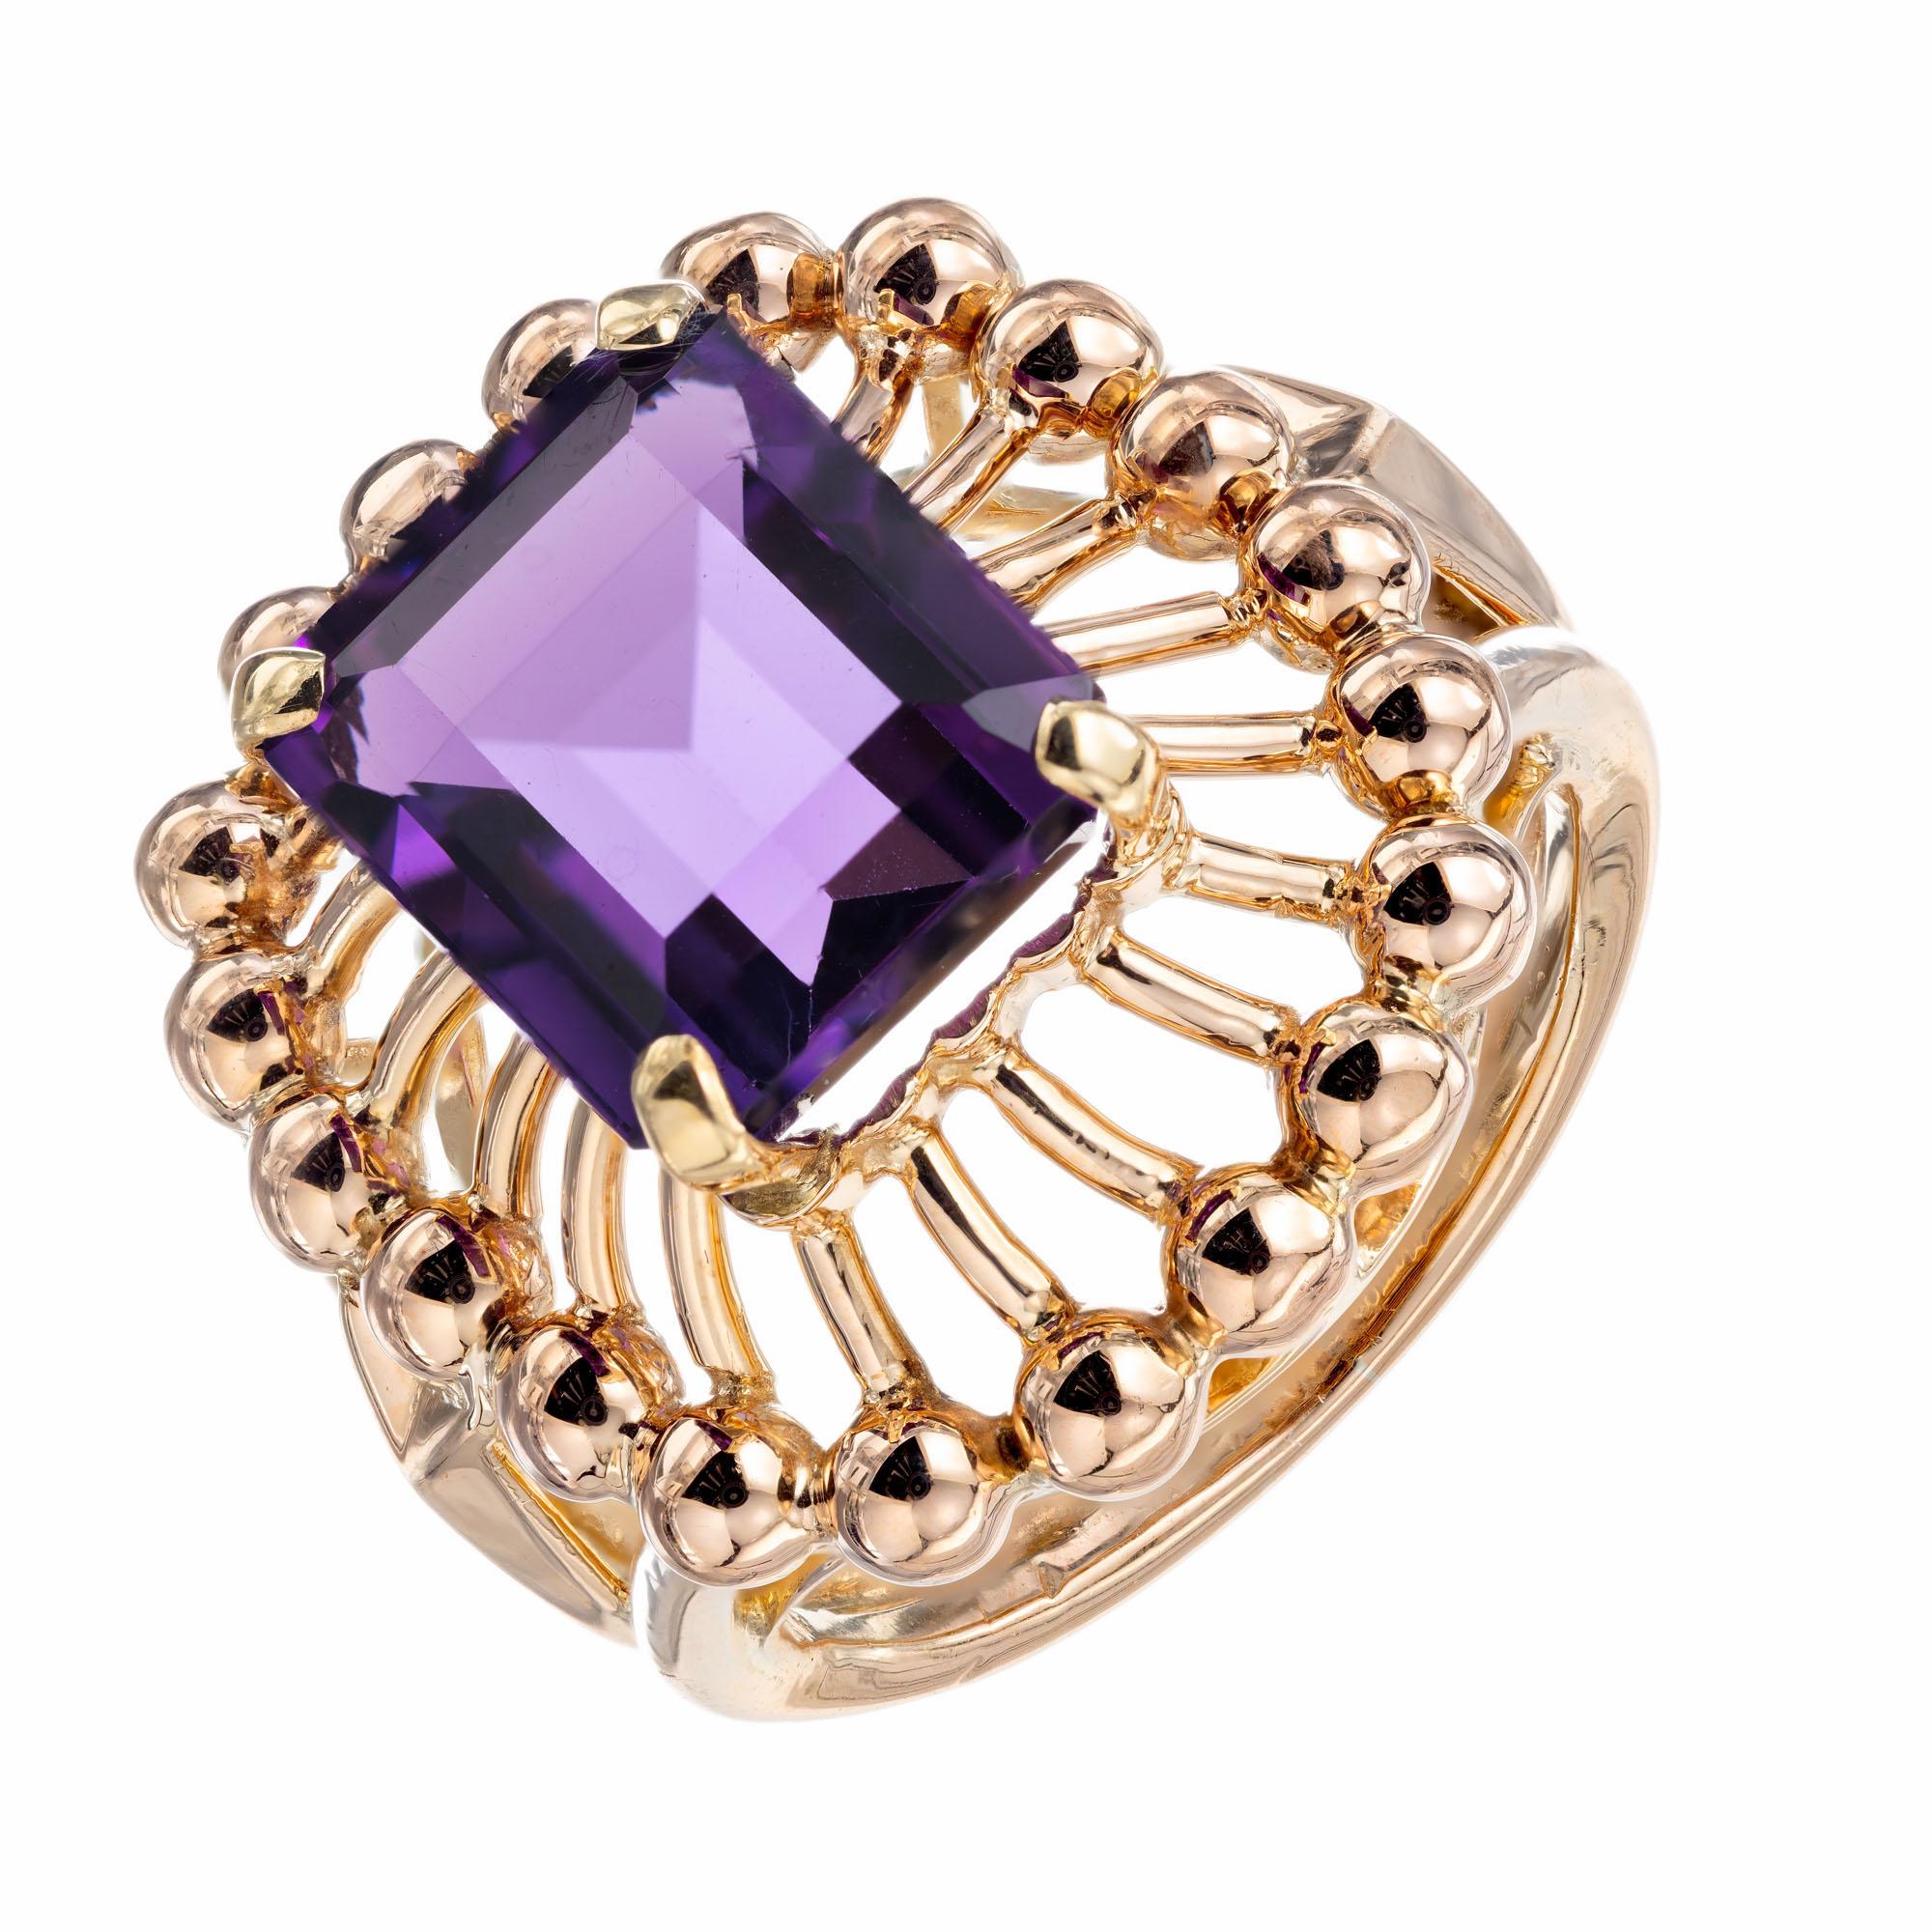 1930's 6.50 rectangle shape Amethyst center stone with a gold bead halo in a 18k rose gold setting. 

1 12 x 10mm bright gem natural purple Amethyst, approx. total weight 6.50cts
Size 8.5 and sizable
18k pink gold
Tested: 18k pink gold
10.4